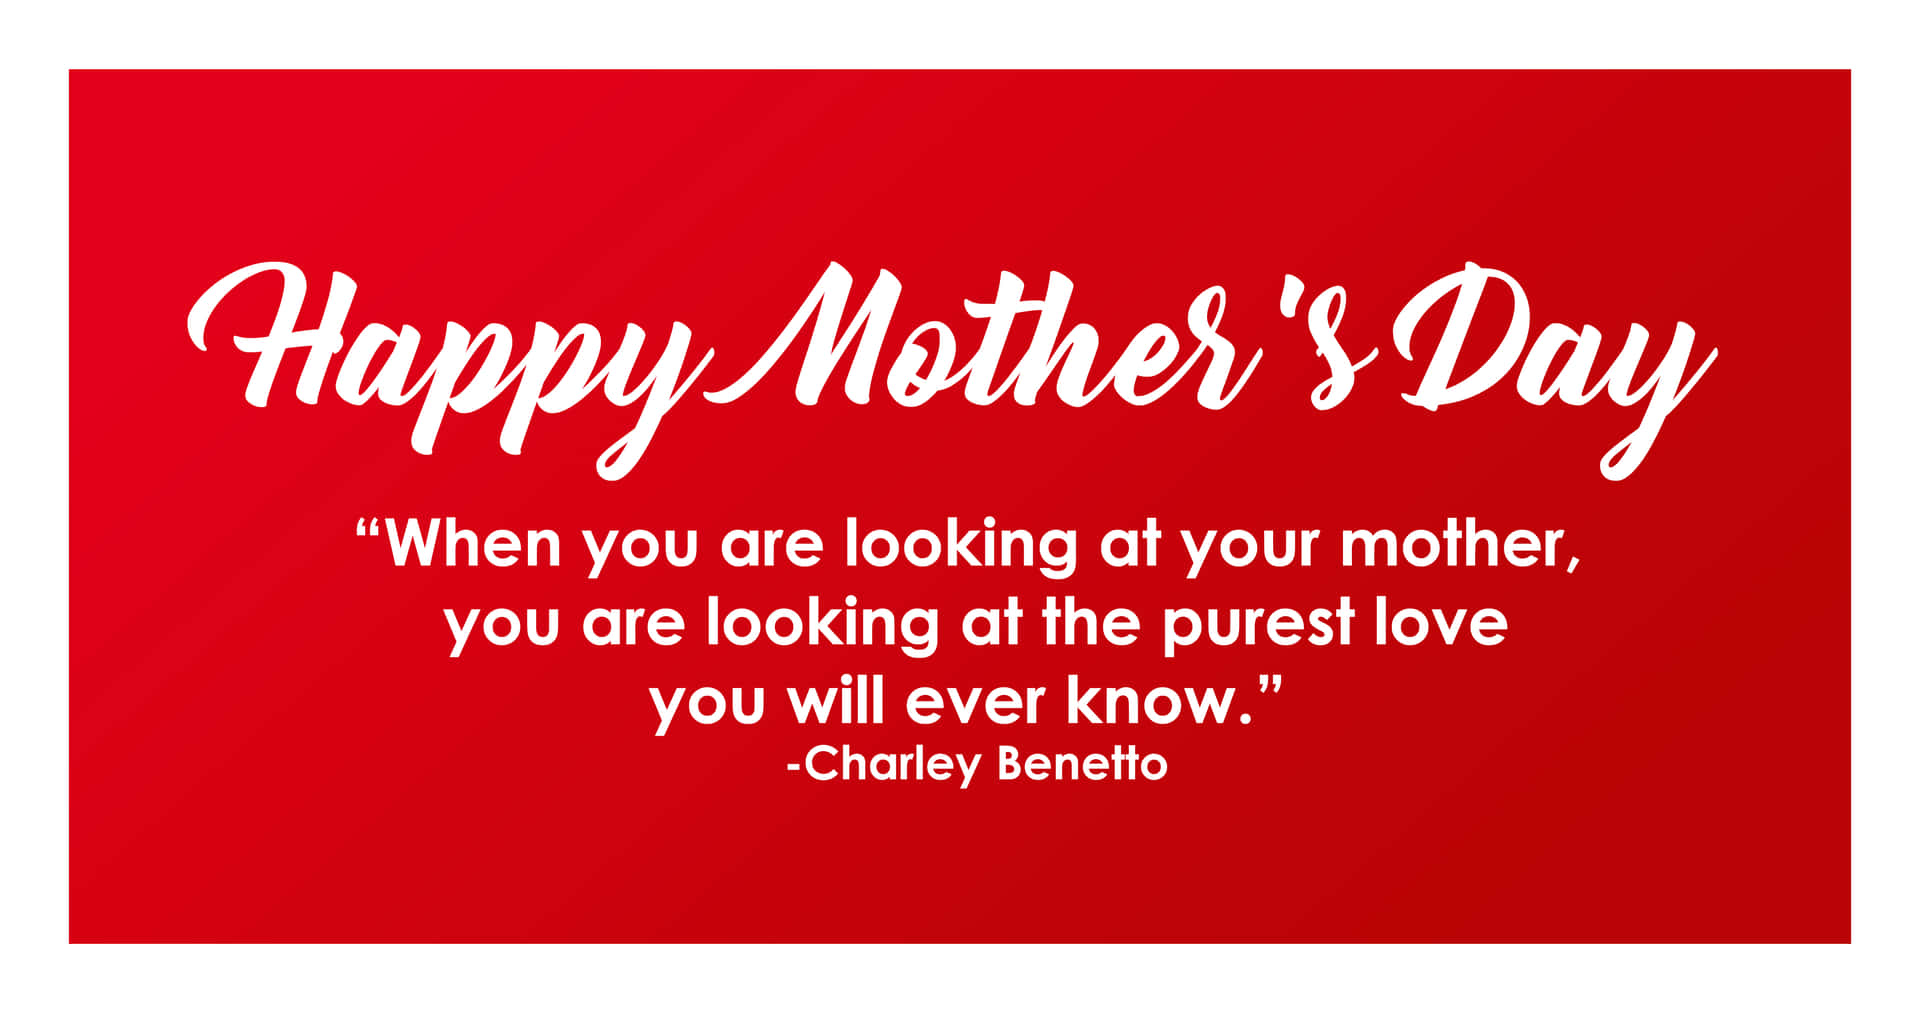 Happy Mothers Day Quote Red Canvas Hd